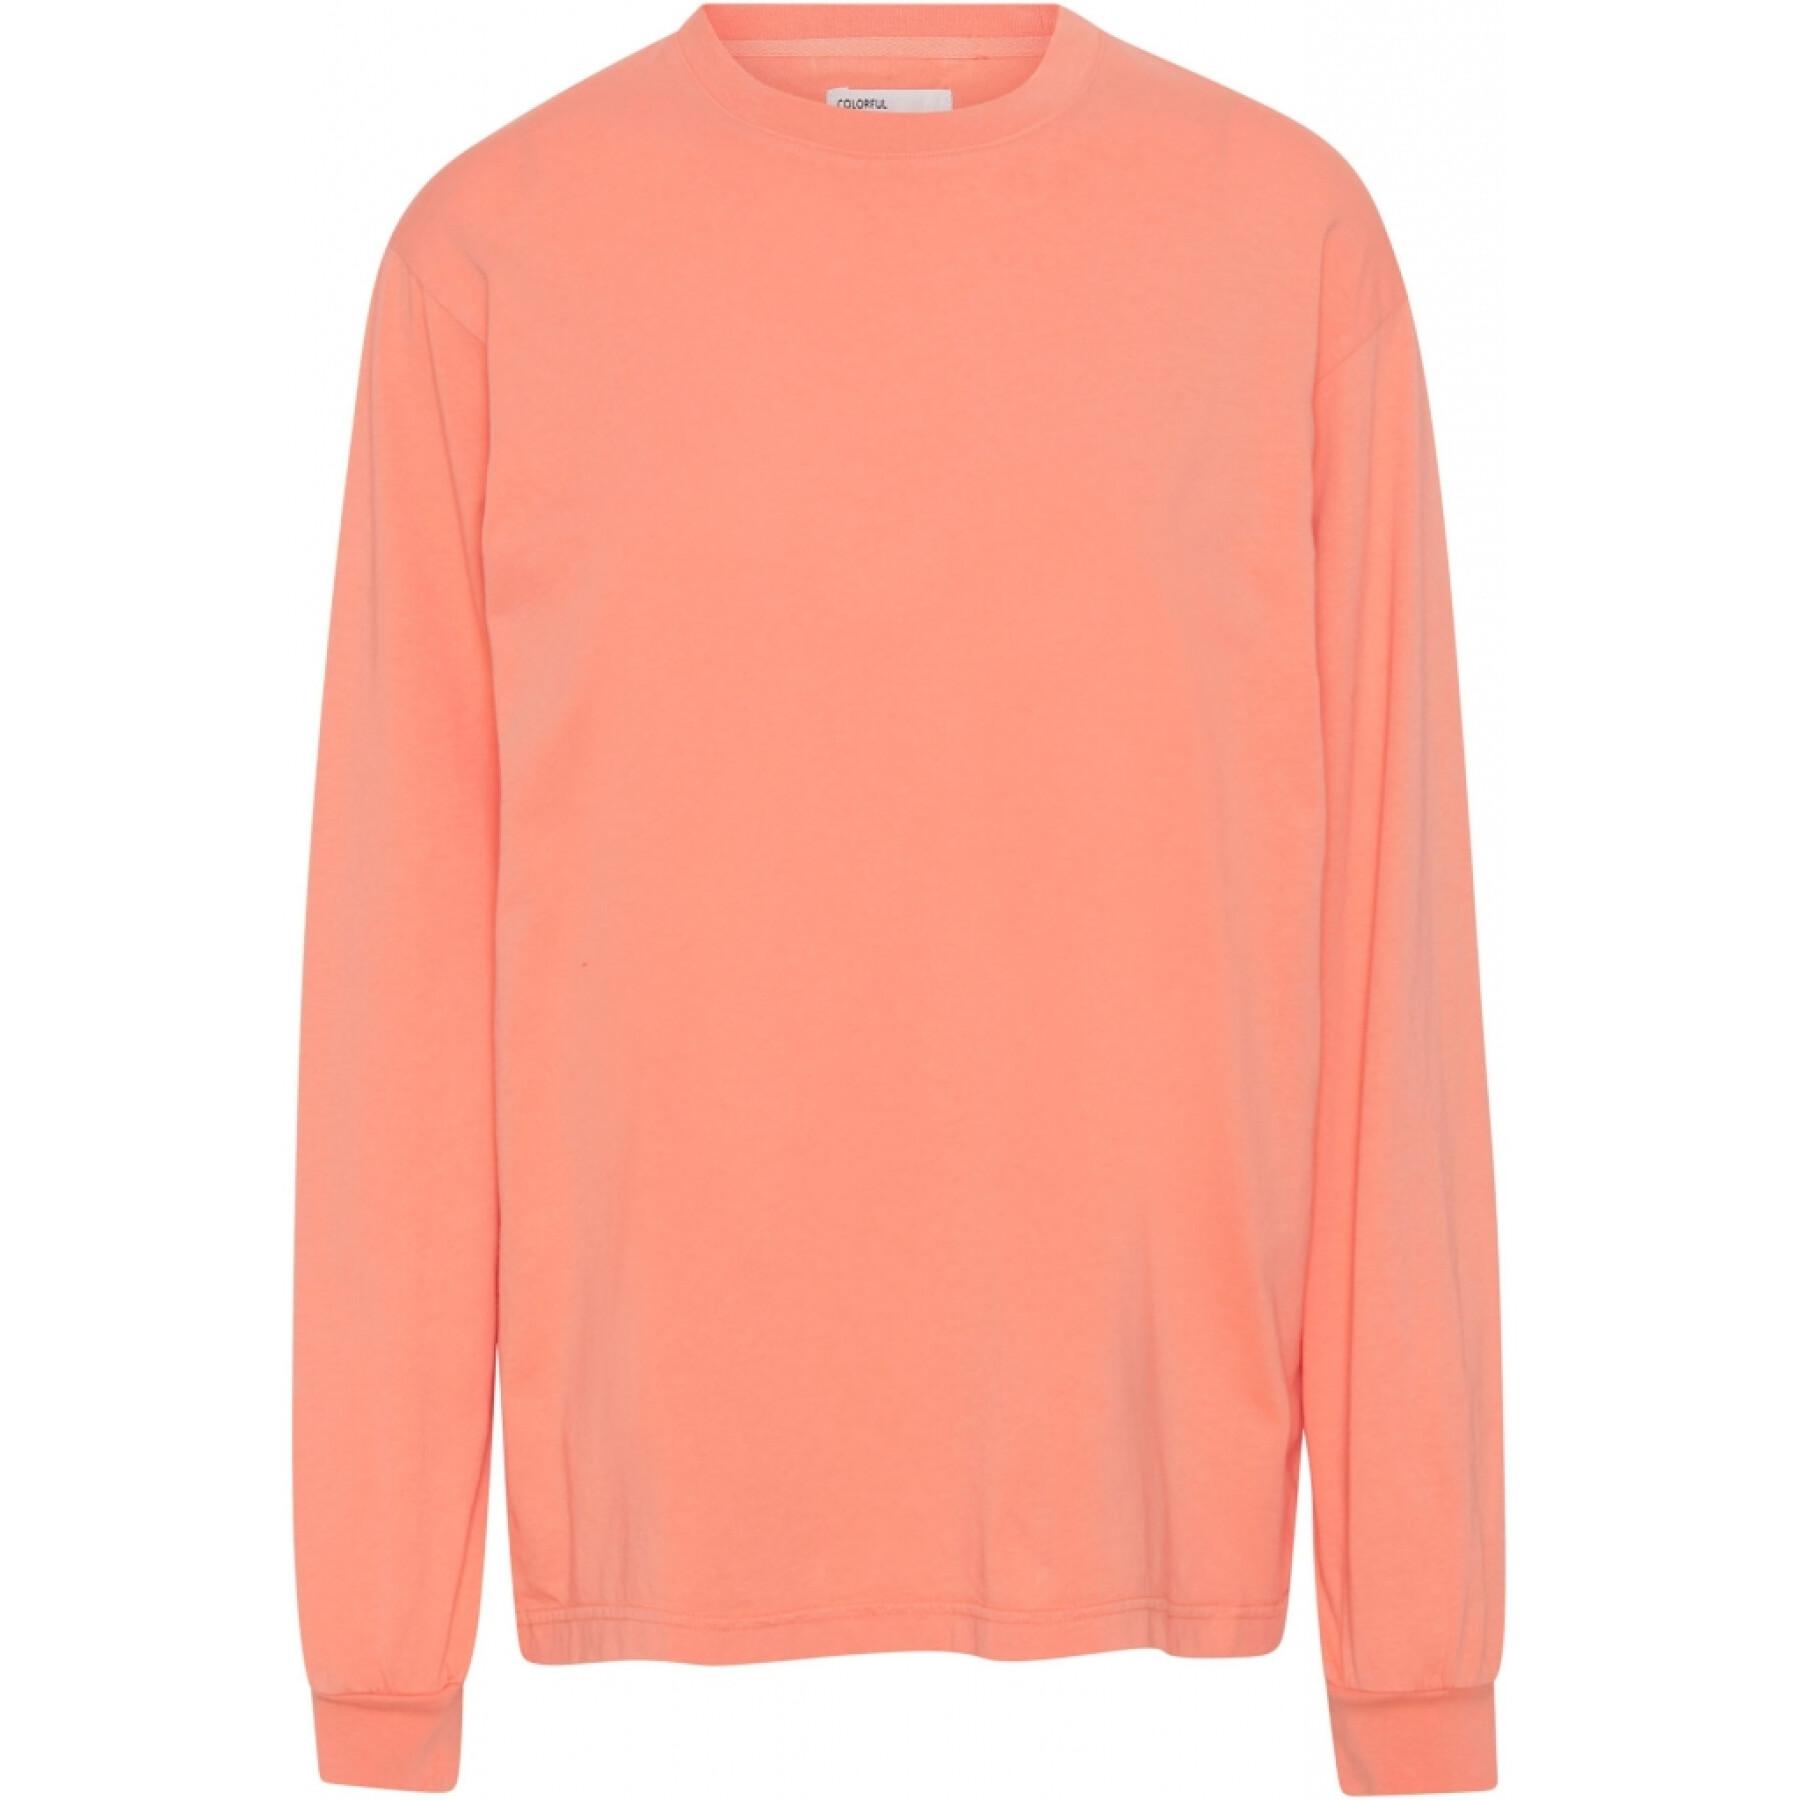 Long sleeve T-shirt Colorful Standard Organic oversized bright coral